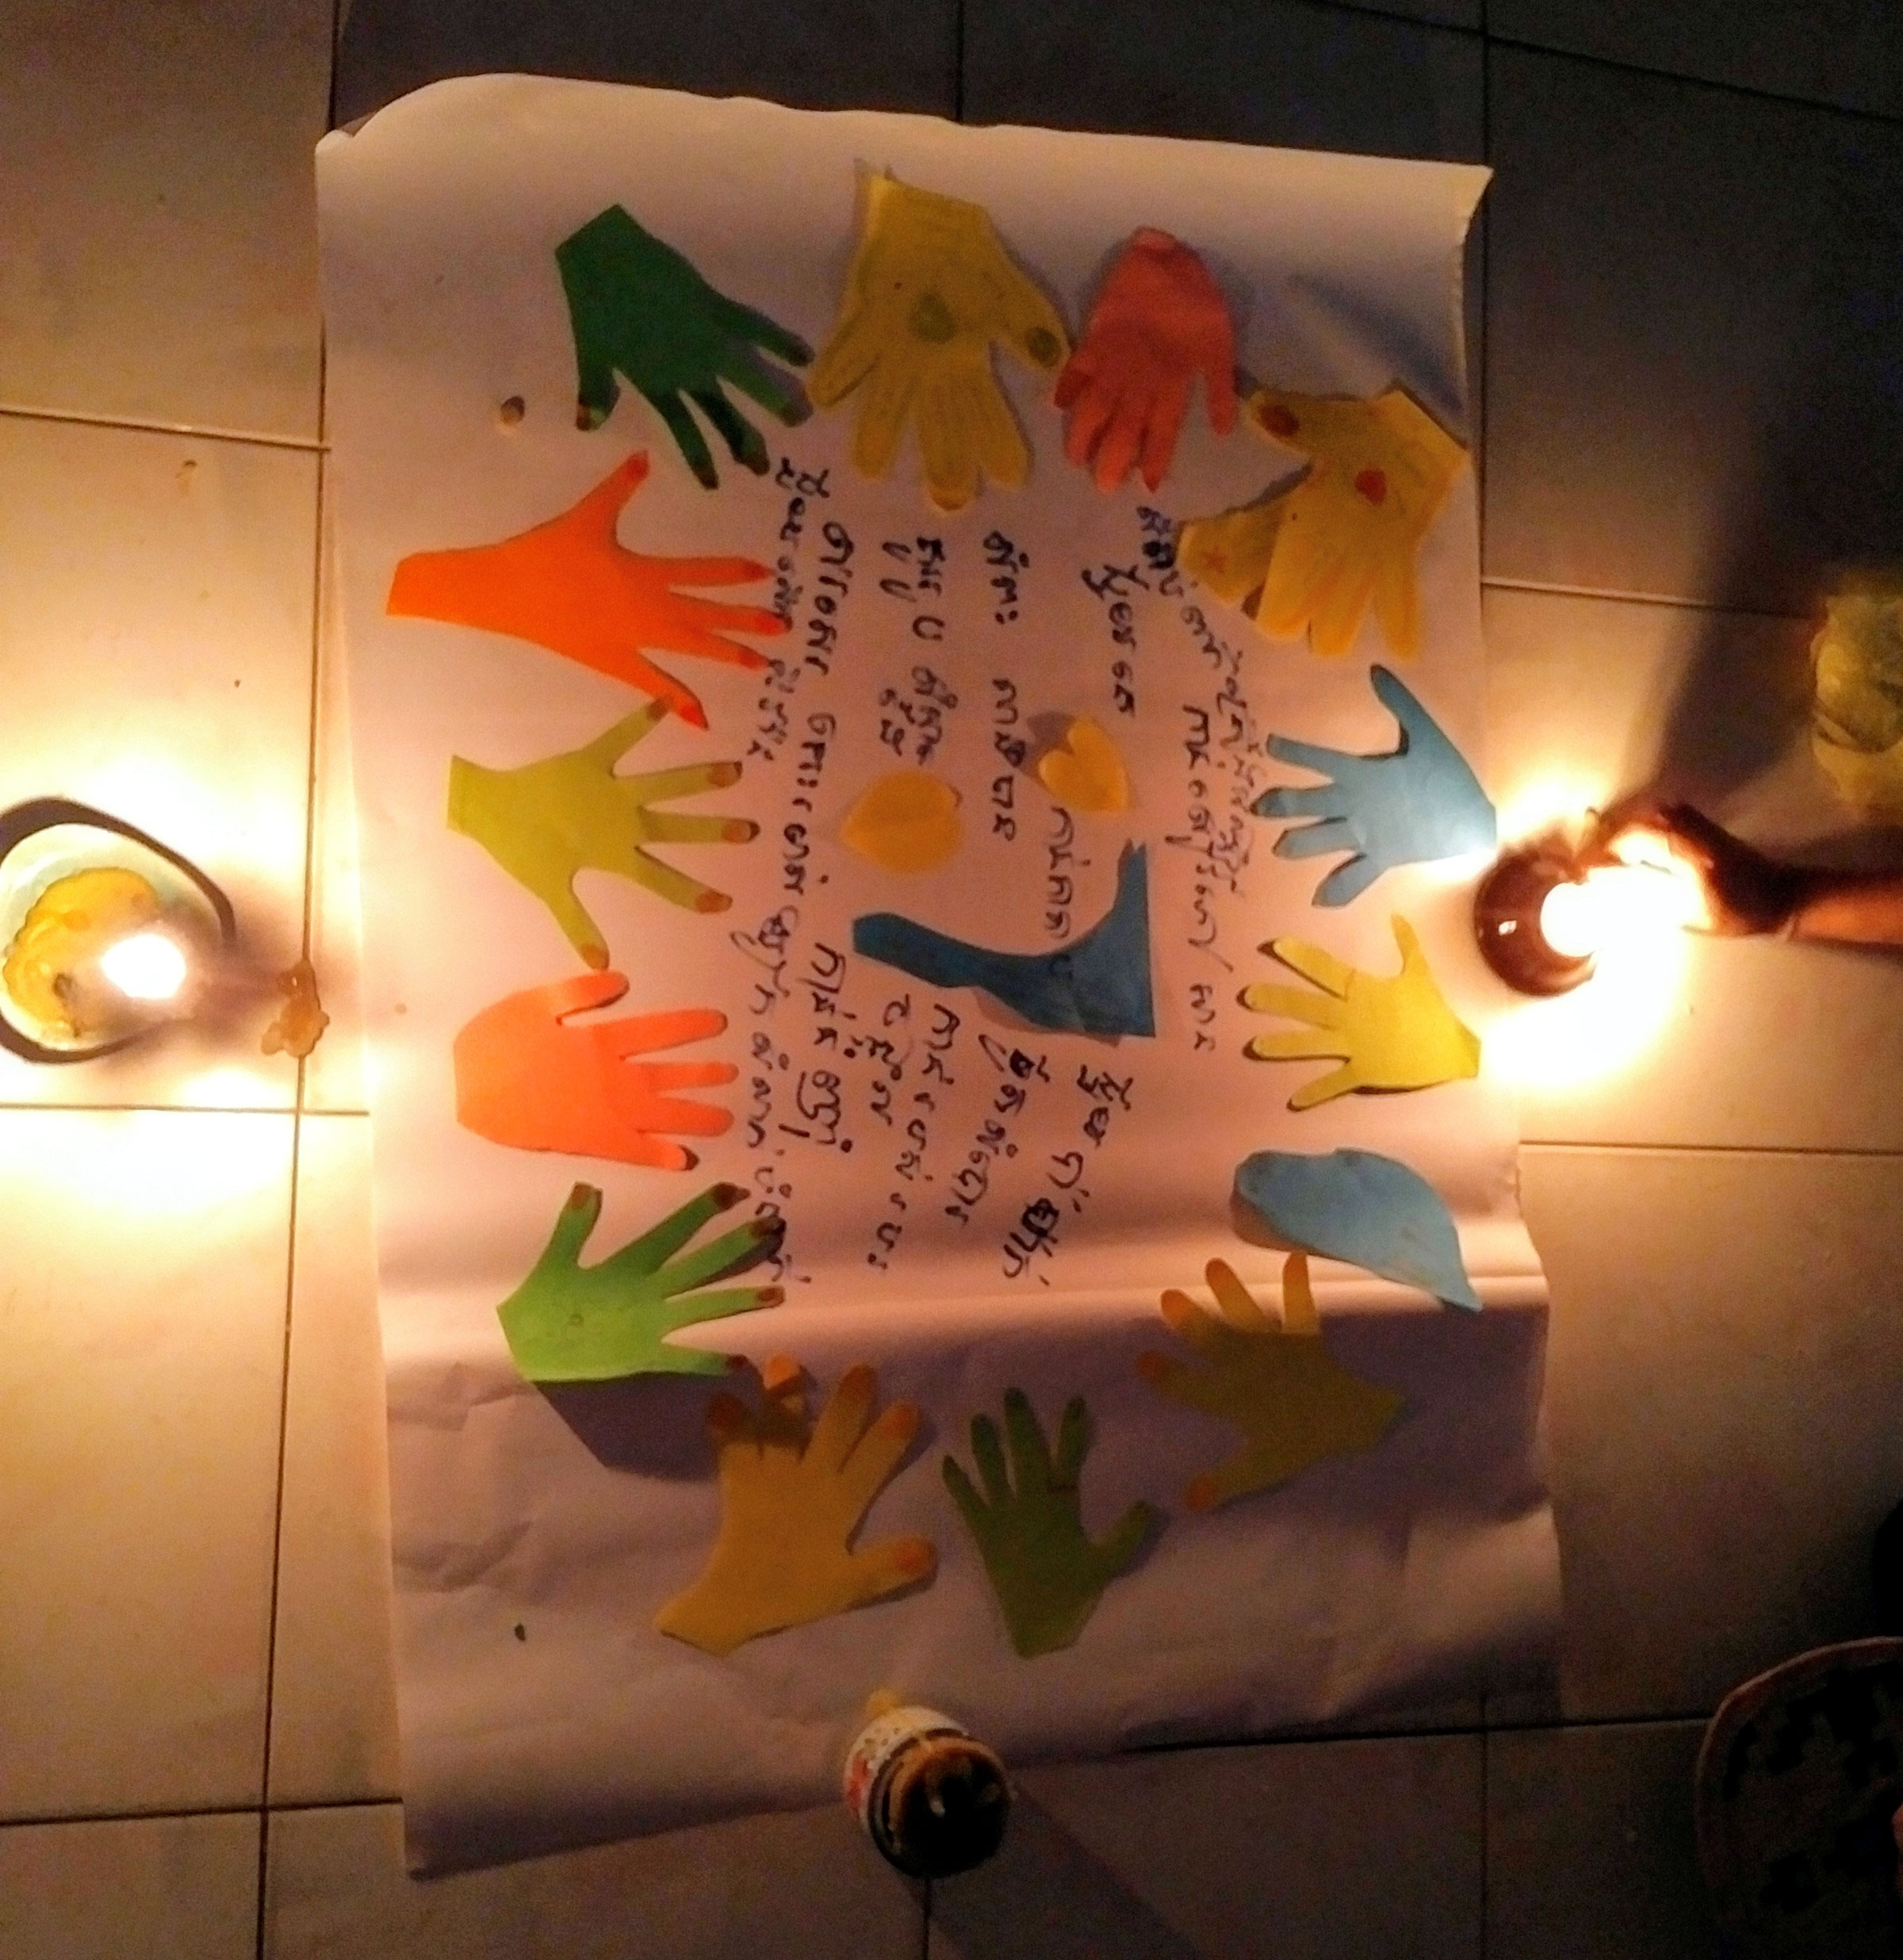 Respect activity - hands are for. Participants were working under candle light when electricity was cut off.